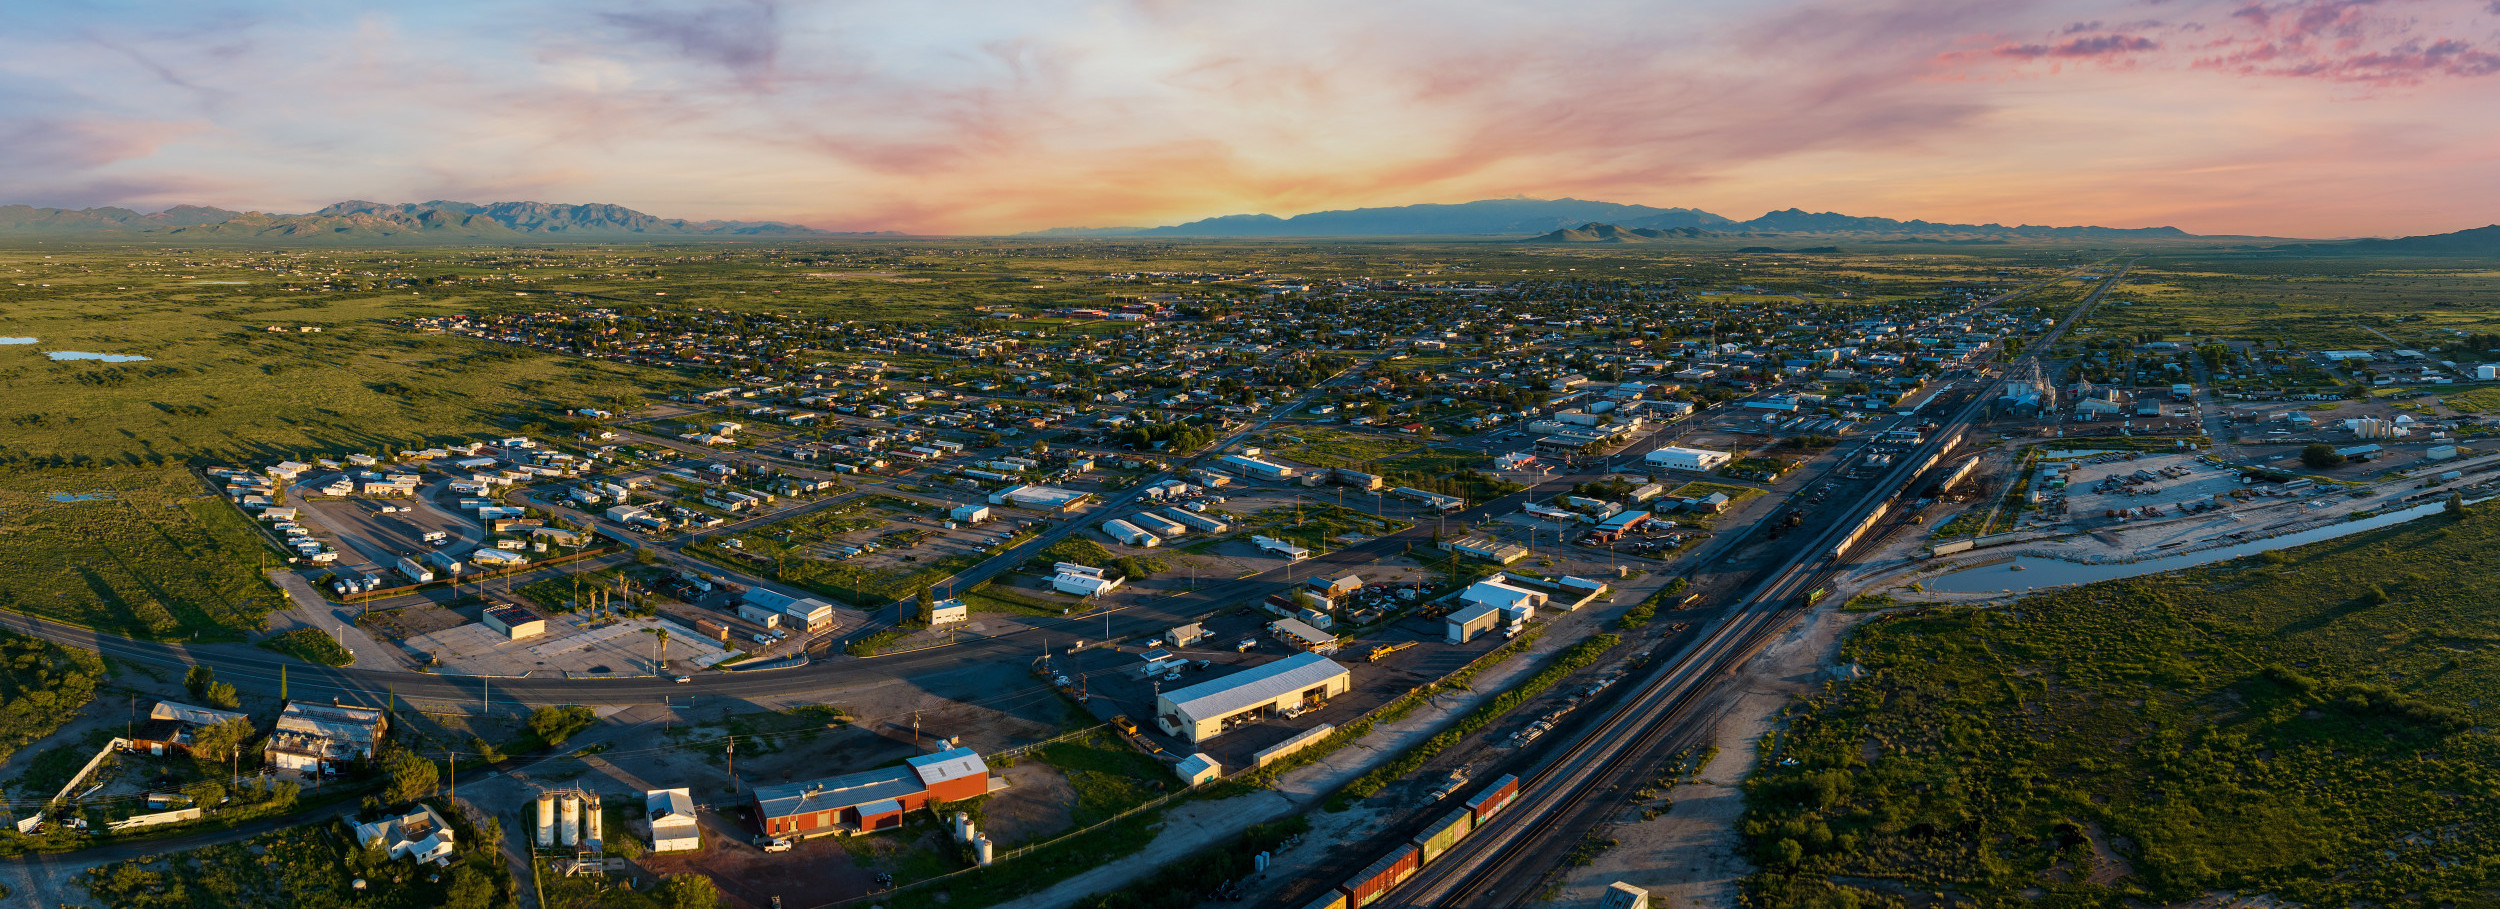 aerial view of willcox